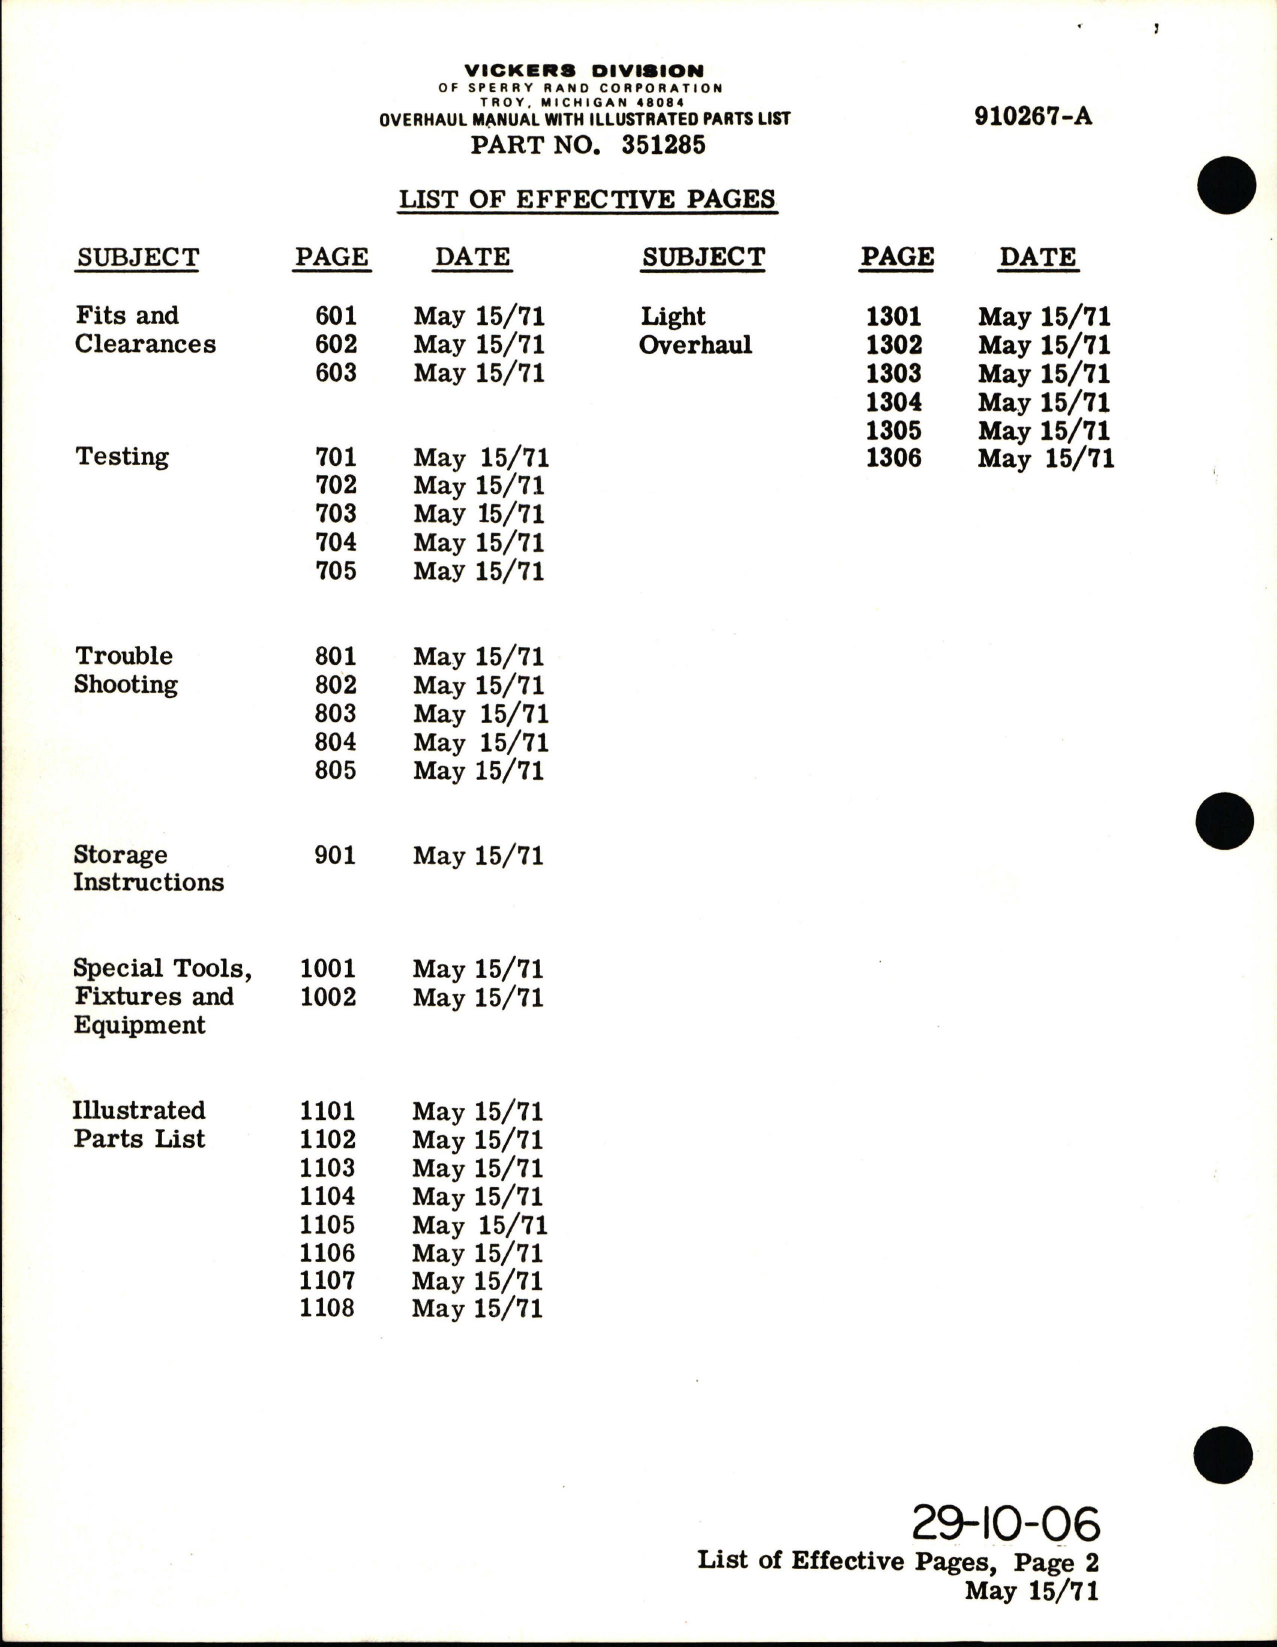 Sample page 8 from AirCorps Library document: Overhaul with Illustrated Parts List for Variable Displacement Hydraulic Pump - Part 351285 - Model PV3-022-8A